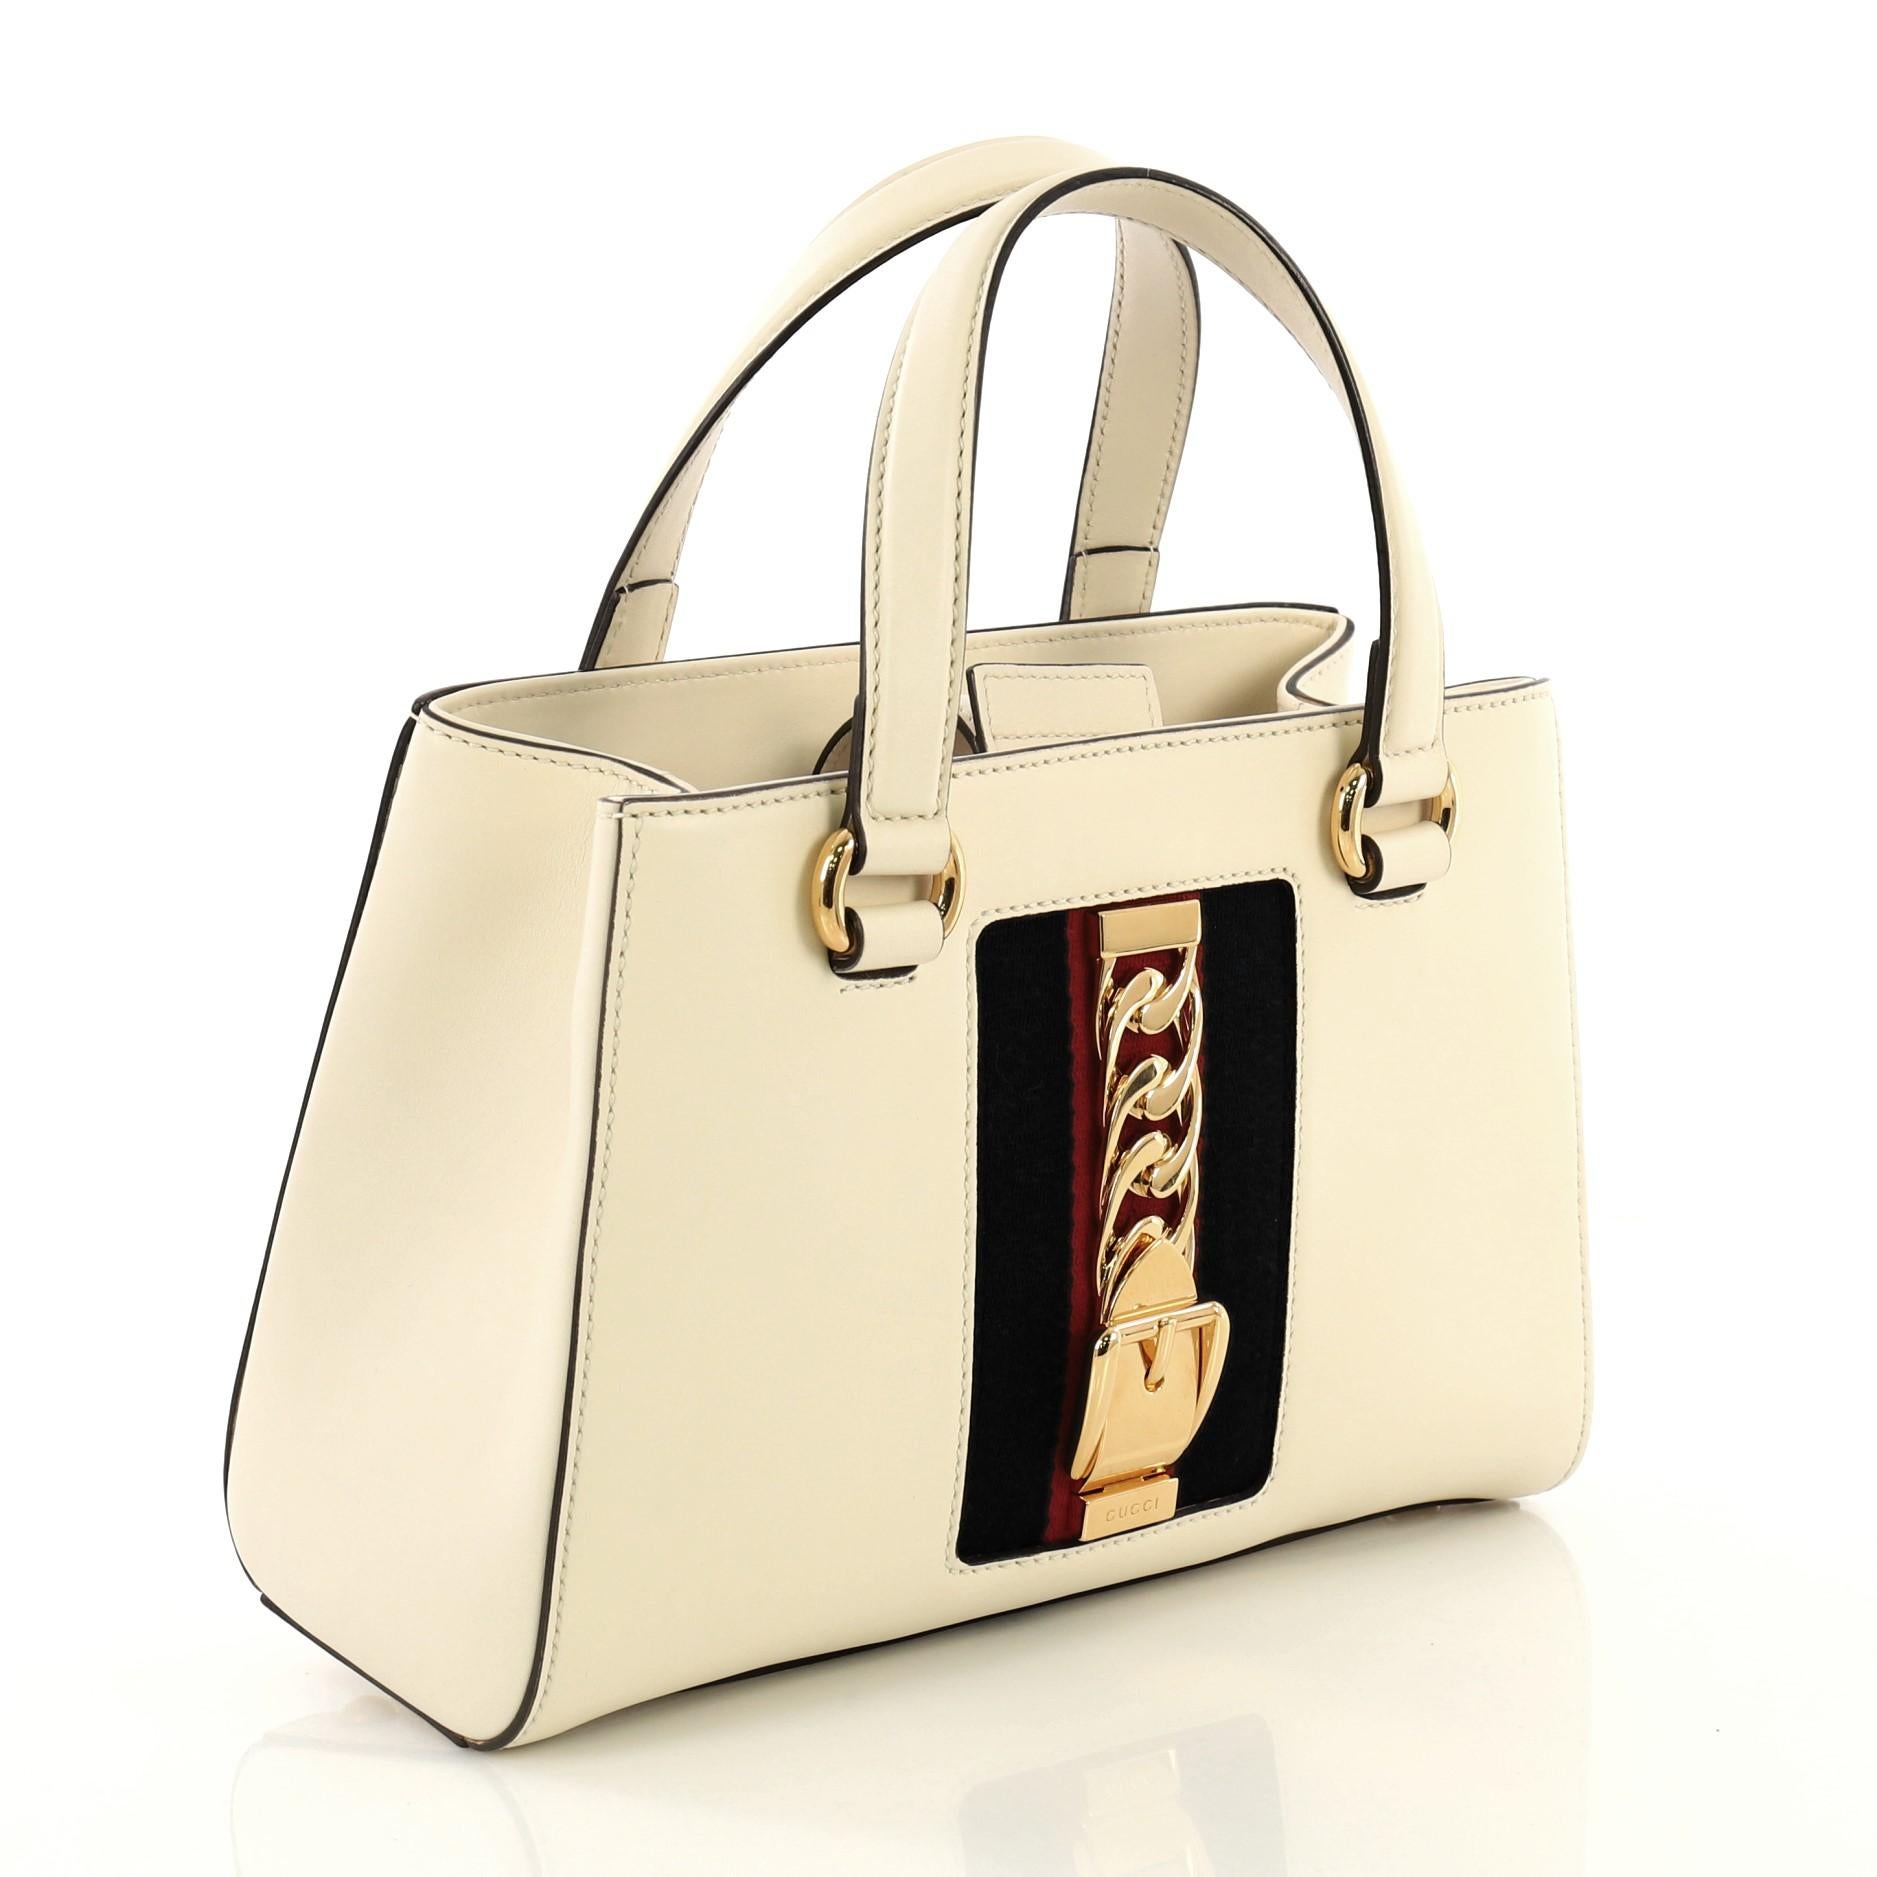 This Gucci Sylvie Top Handle Tote Leather Medium, crafted from white leather, features dual leather handles, nylon web detail with curb chain, and gold-tone hardware. Its magnetic closure opens to a neutral microfiber interior divided into two